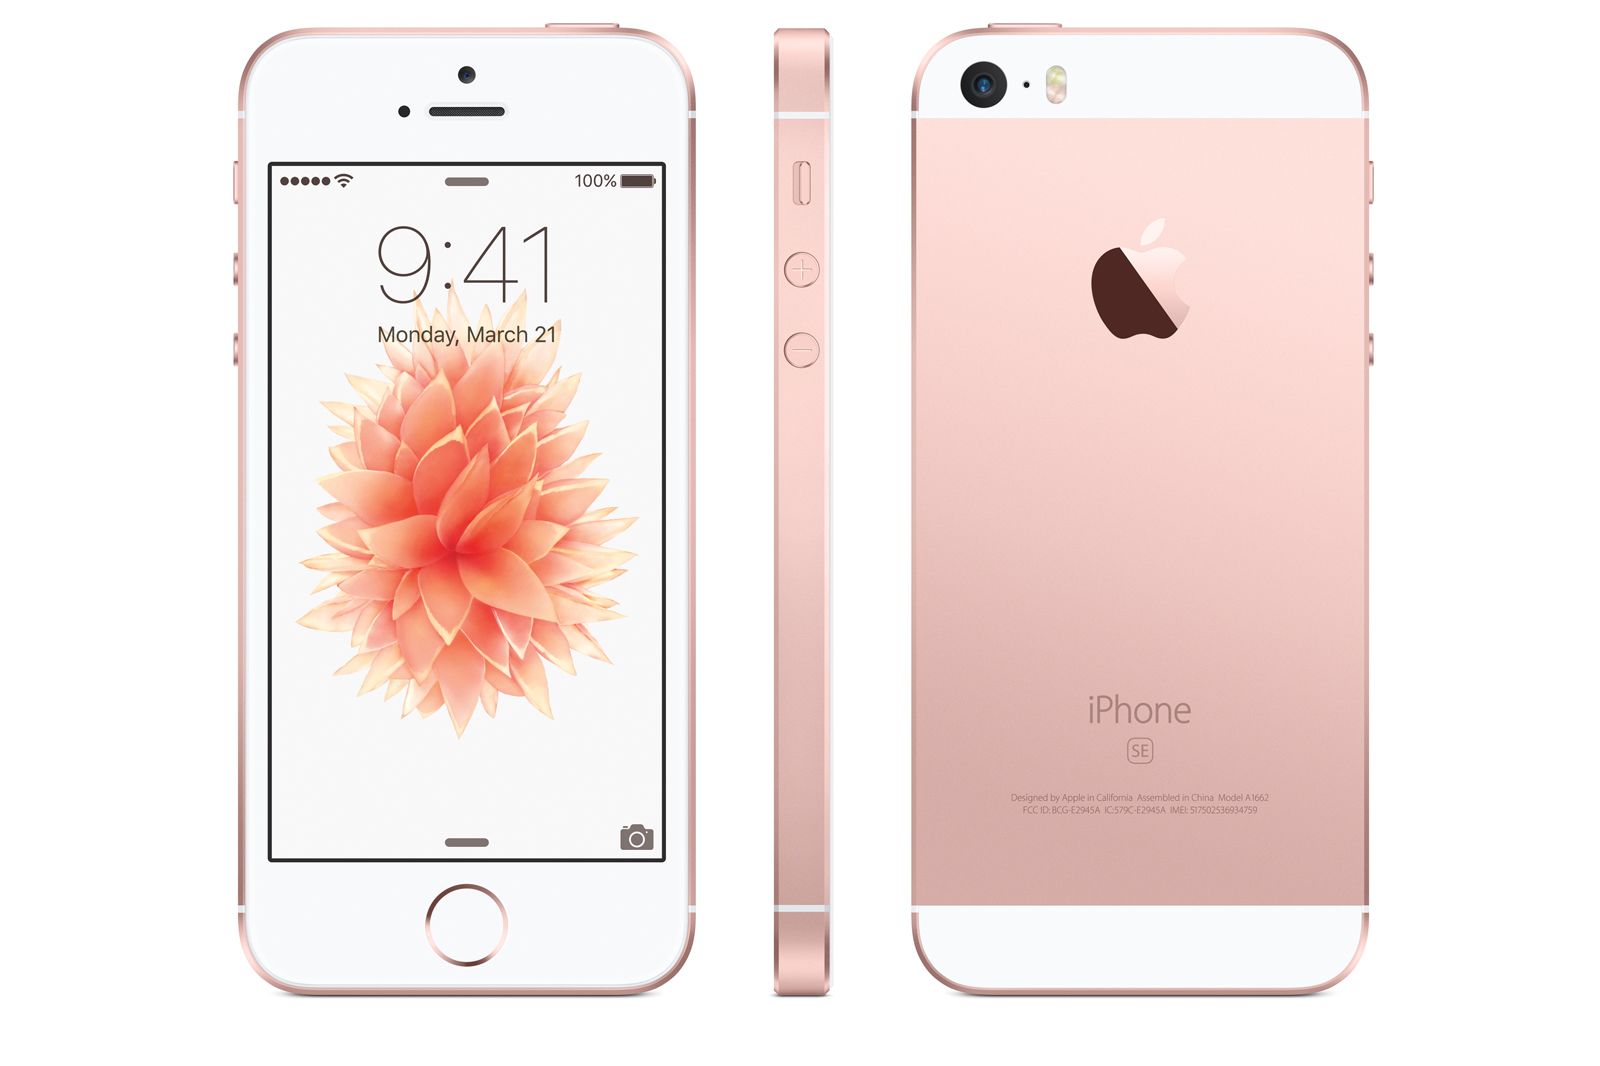 apple iphone se official the 4 inch iphone for all image 1